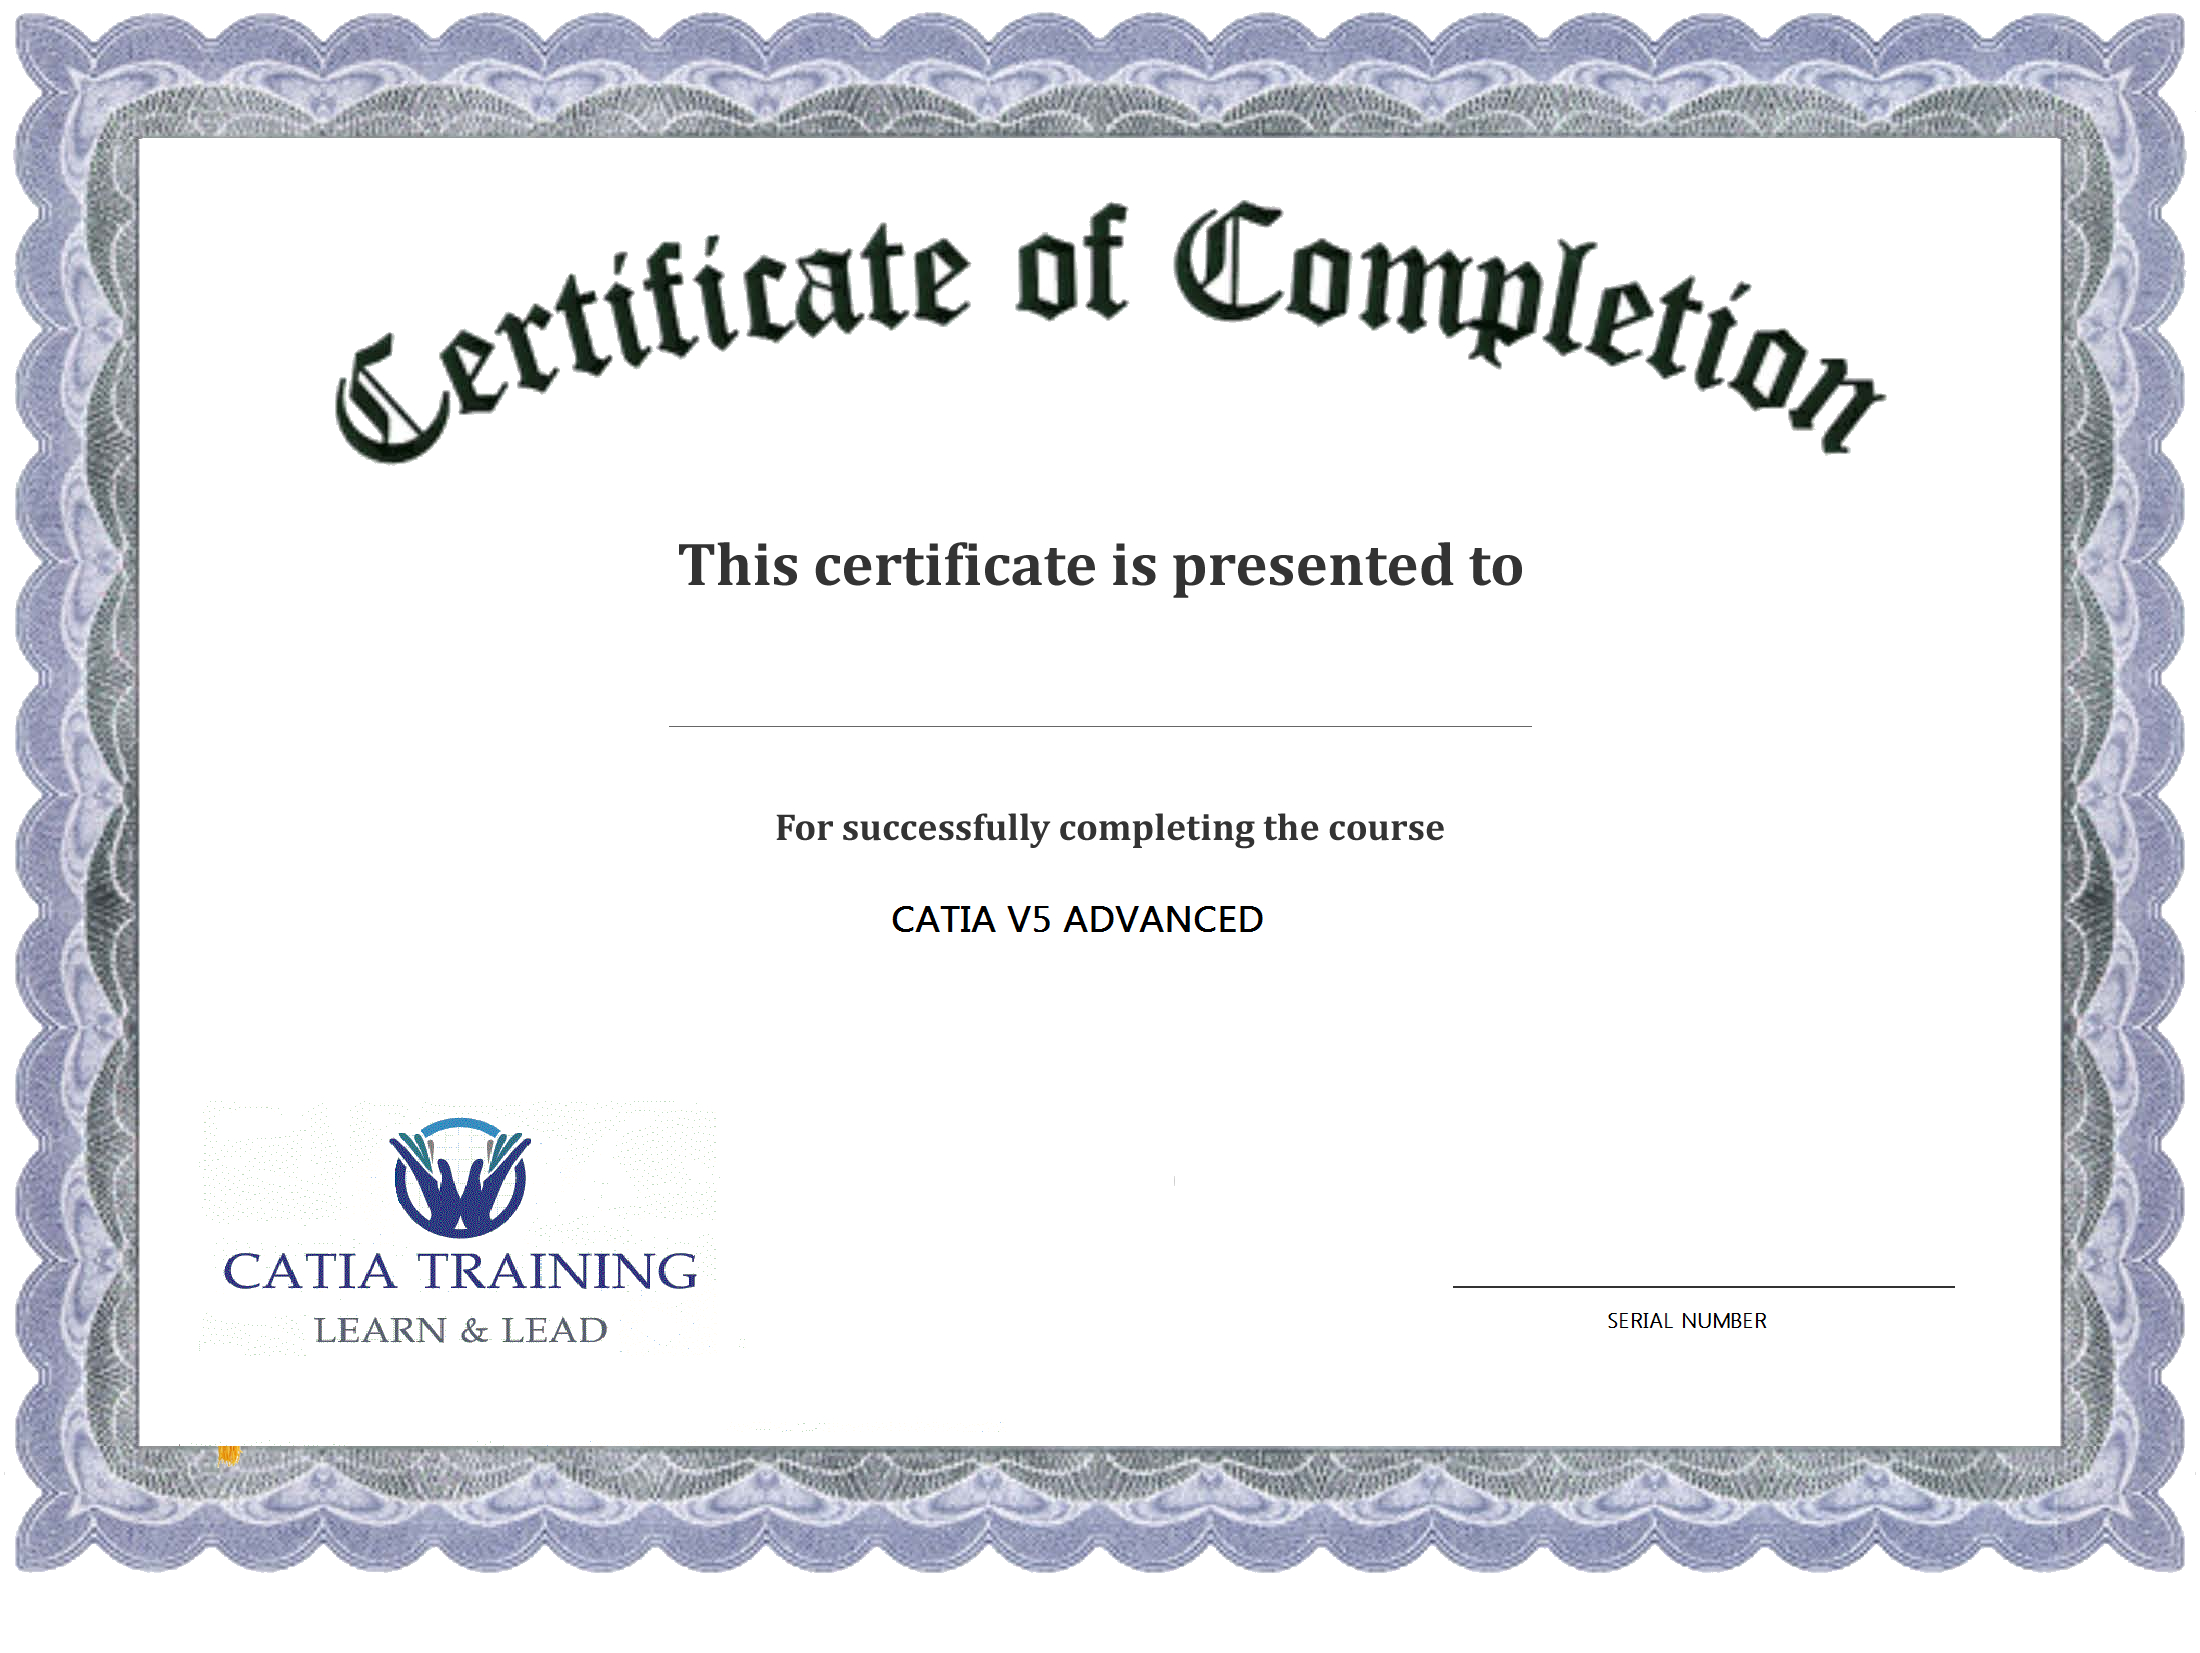 🥰free Printable Certificate Of Participation Templates (Cop)🥰 Intended For Certificate Of Participation Template Doc